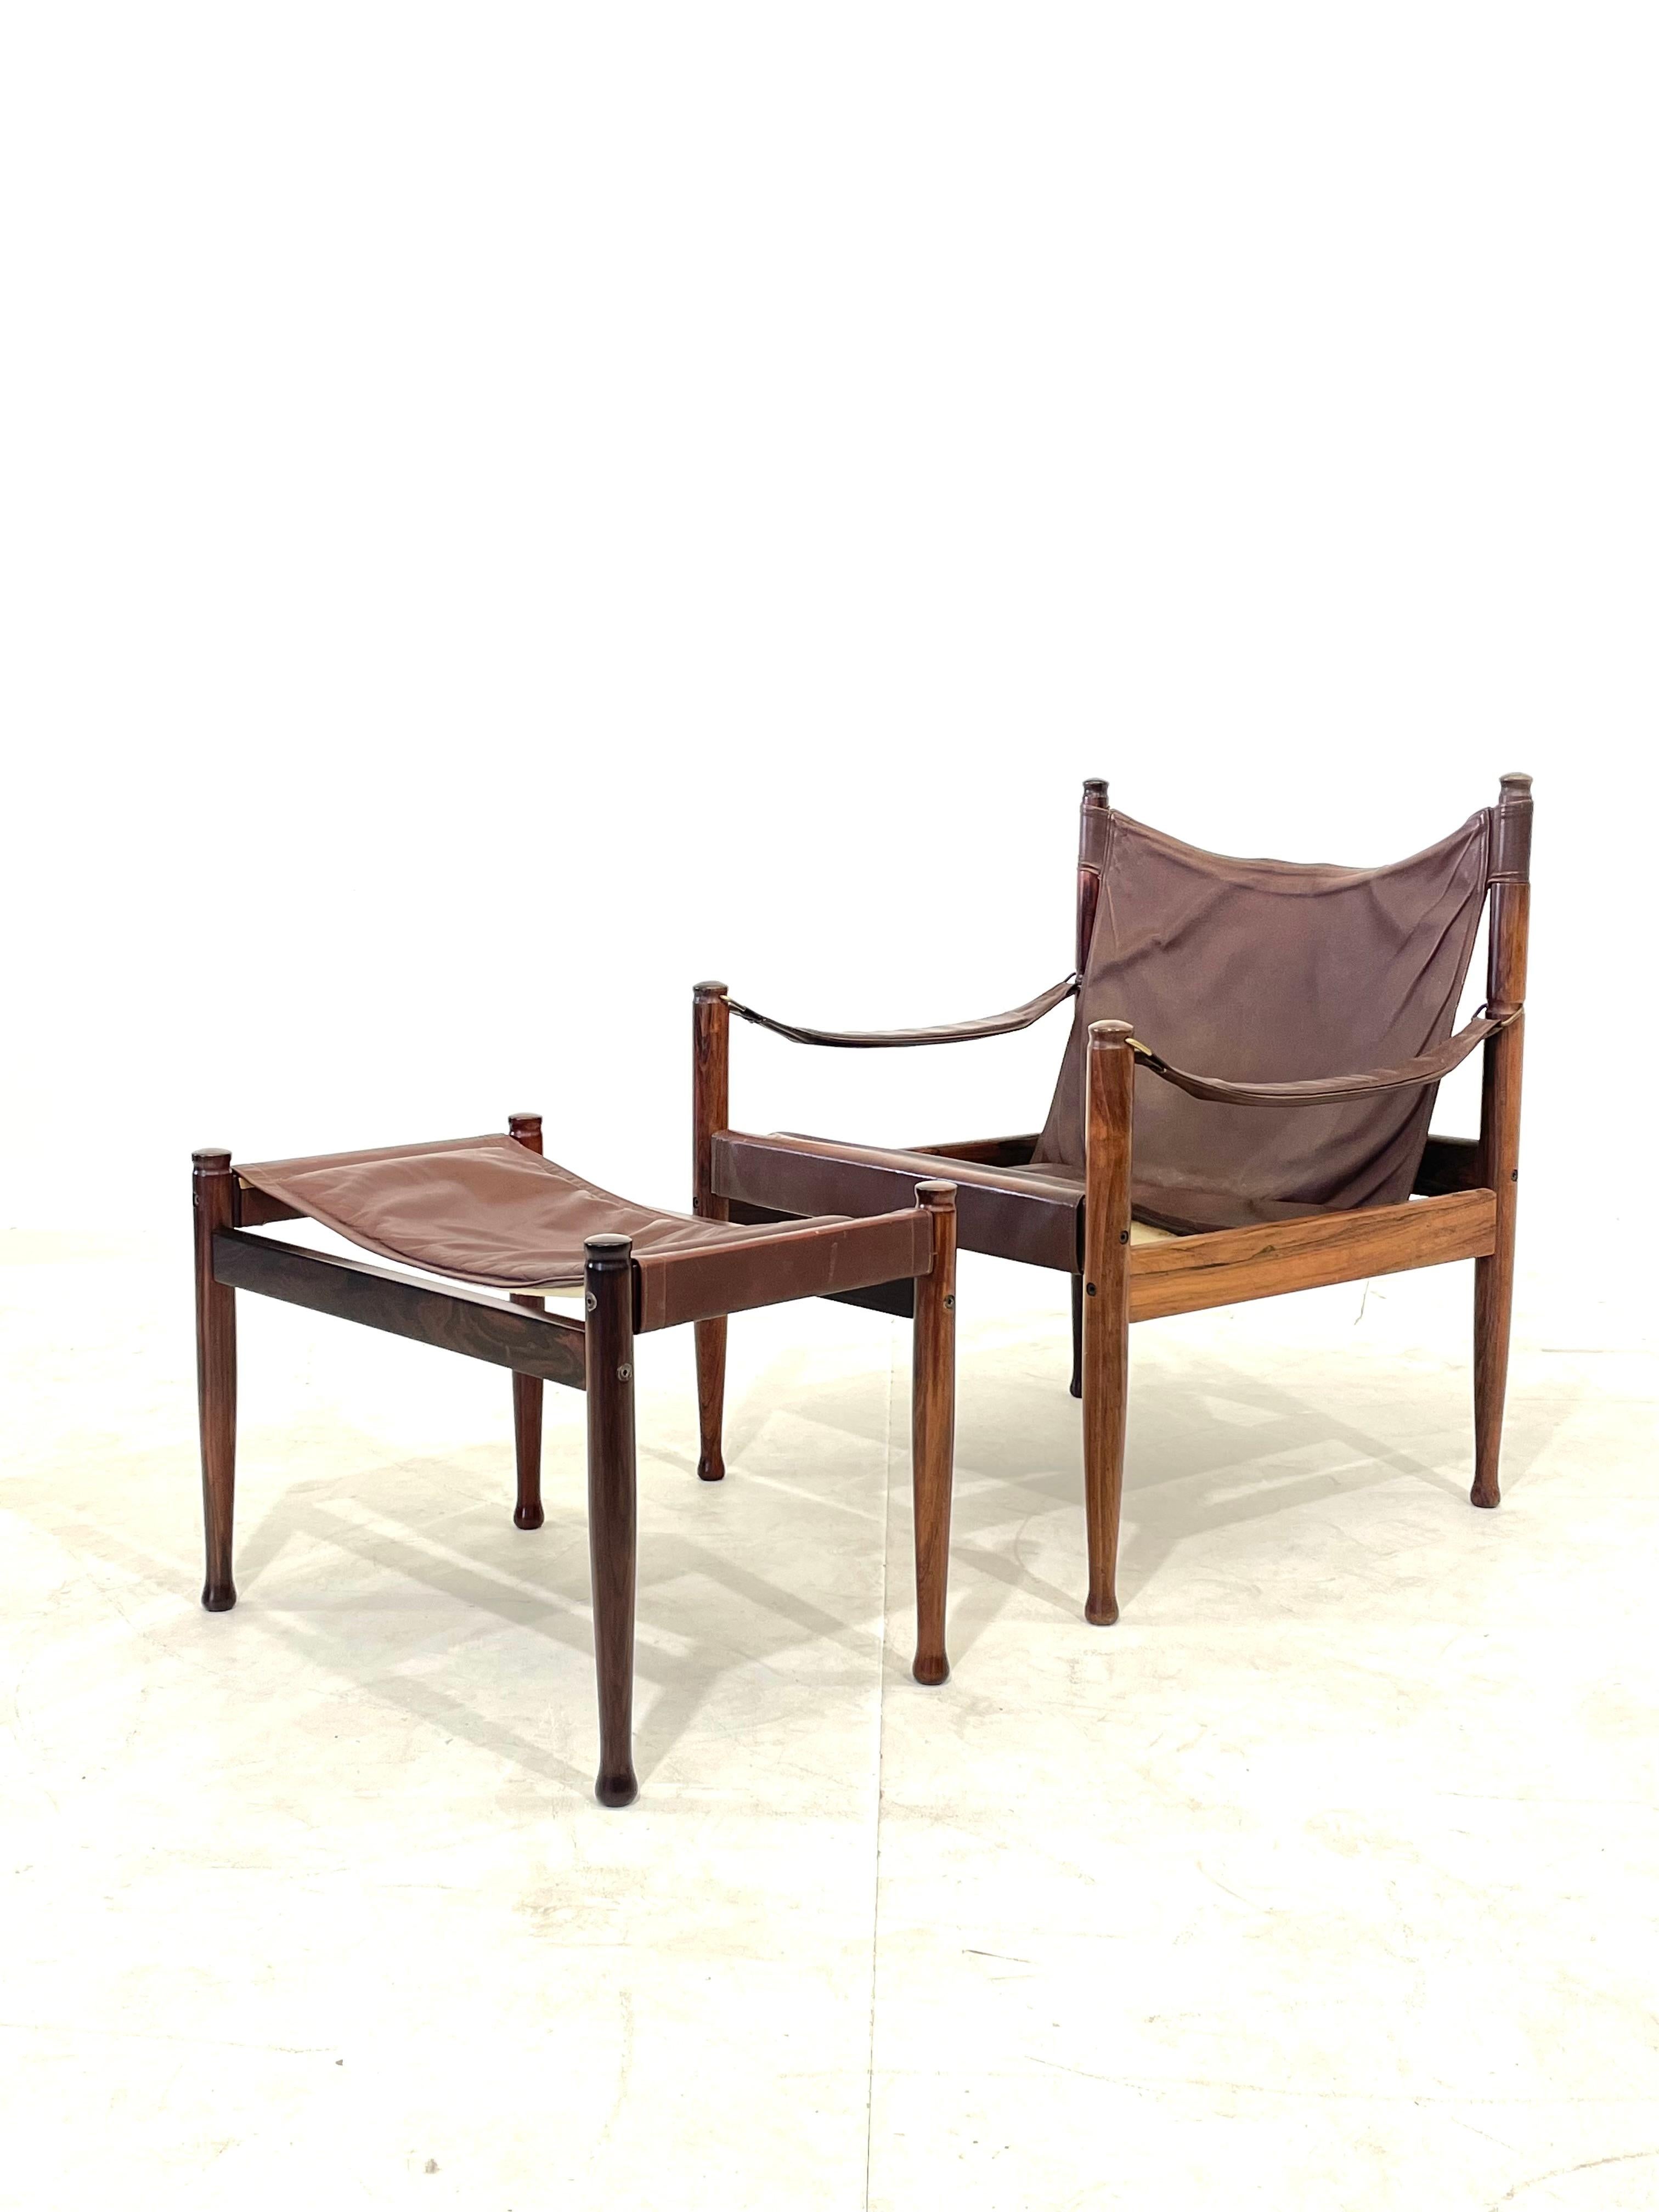 Safari lounge chair and Ottoman designed by Erik Worts for Niels Eilersen, Denmark, 1960. Made of solid rosewood and leather seat with brass details. Very nice patinated leather seat but still in good vintage condition. 

Stamped below

The chairand